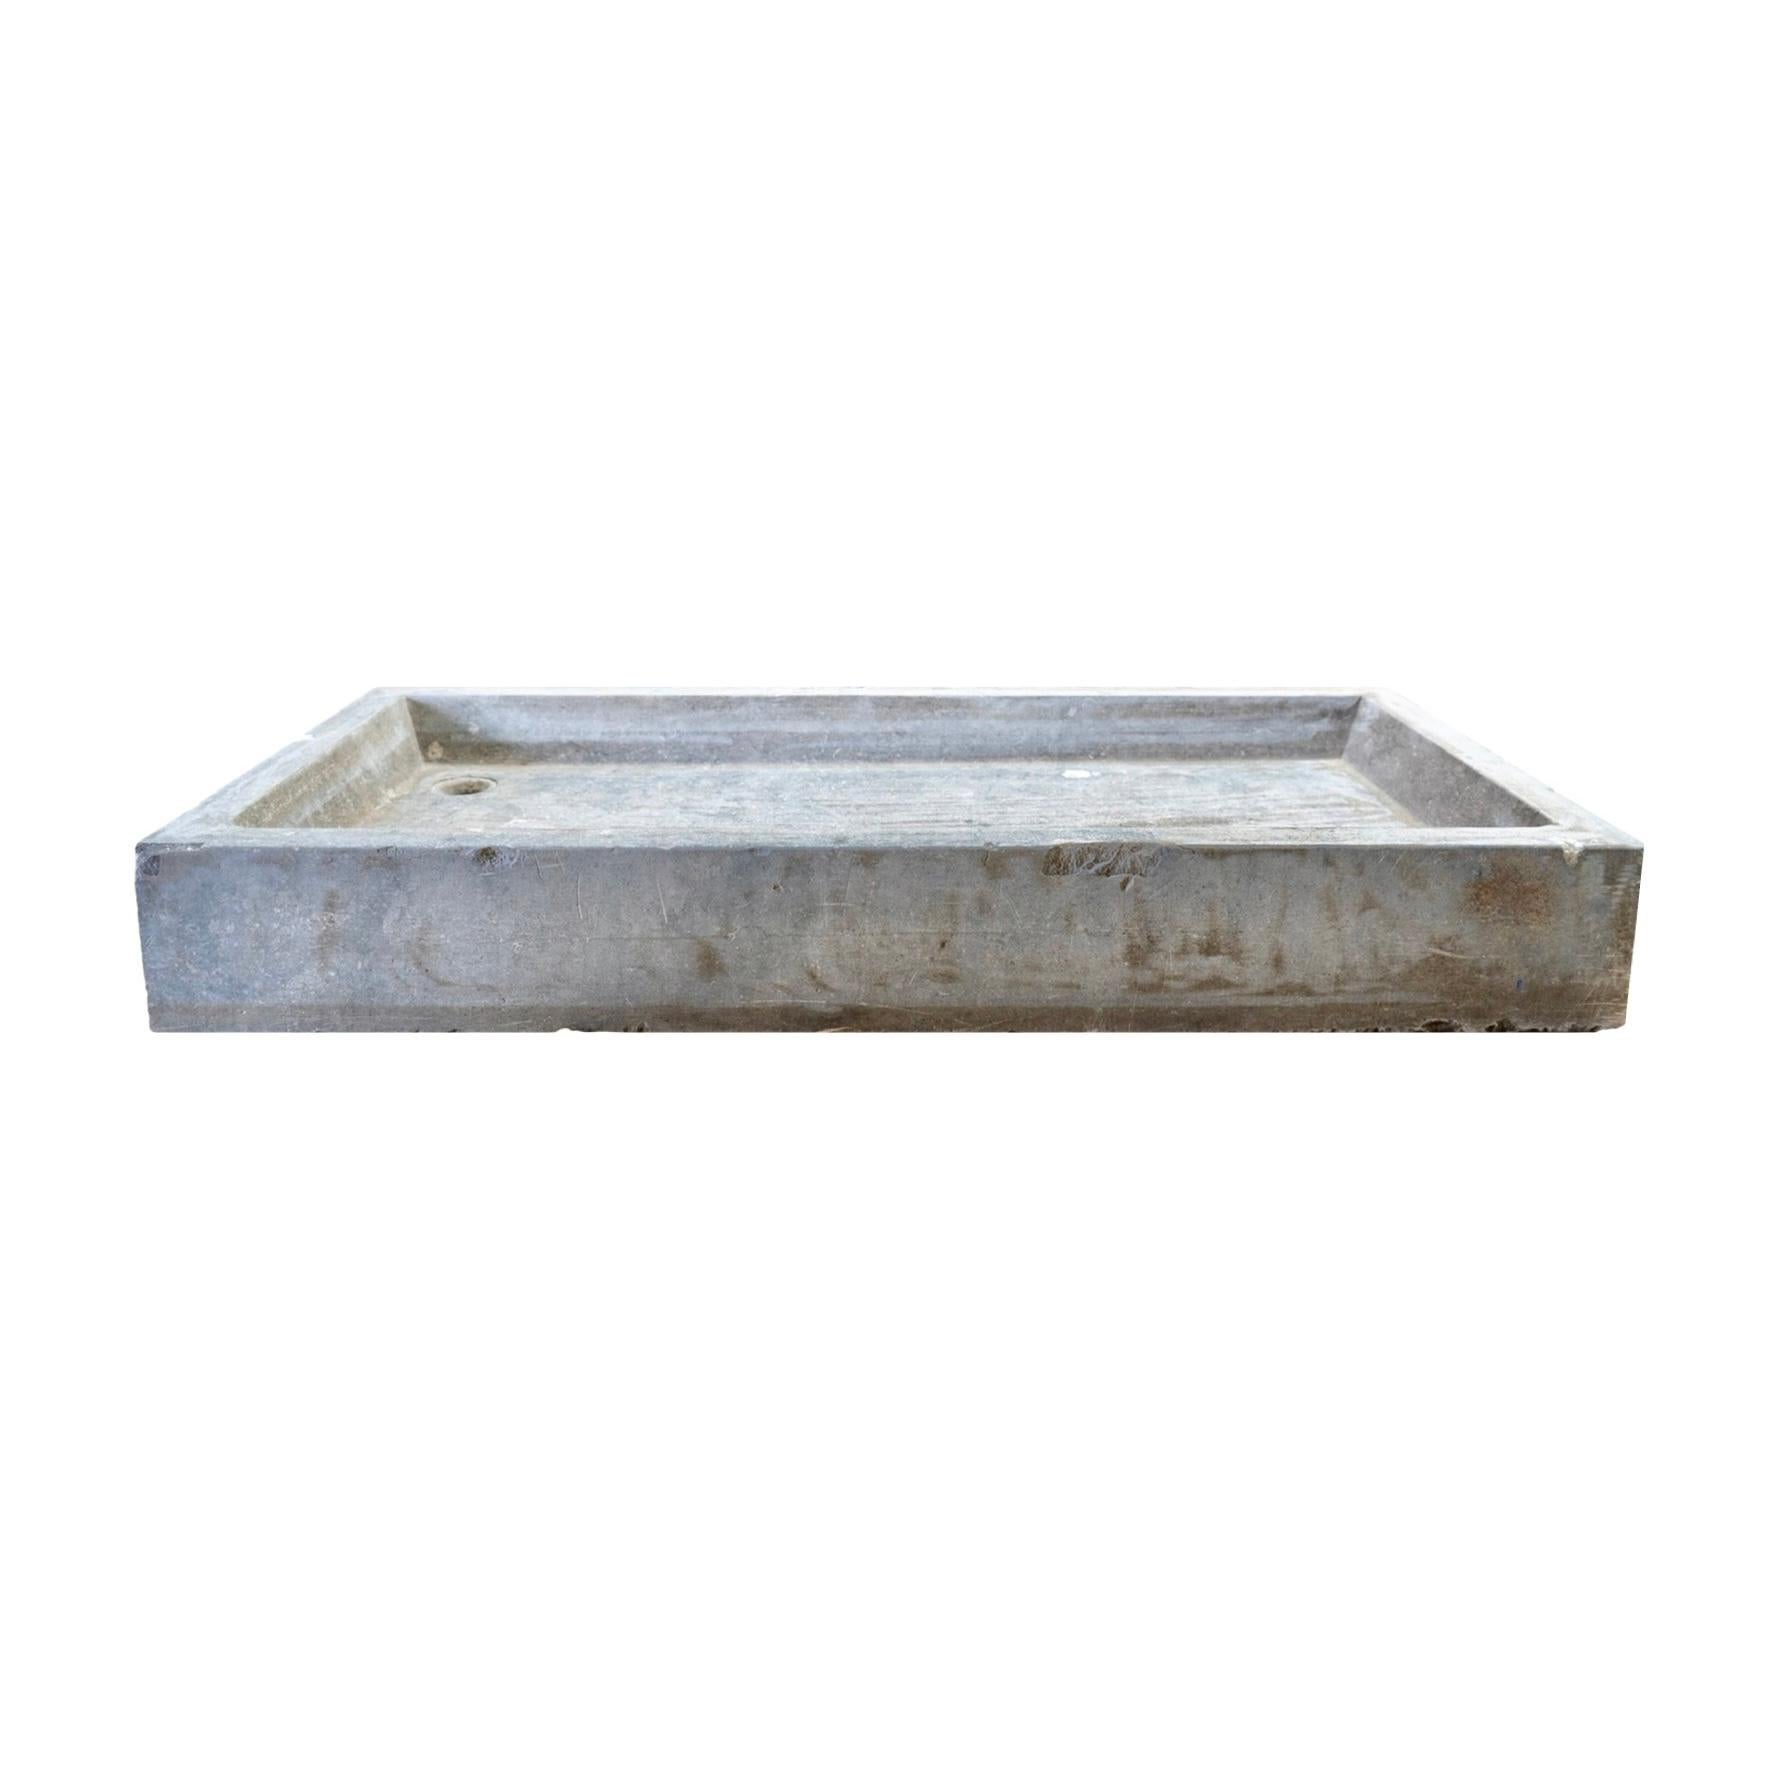 This Belgian Bluestone Sink is a timeless piece that brings both style and functionality to any kitchen or bathroom. Hand-crafted from reclaimed 1880's bluestone and imported from Belgium, this wide rectangular sink features a pre-drilled hole for